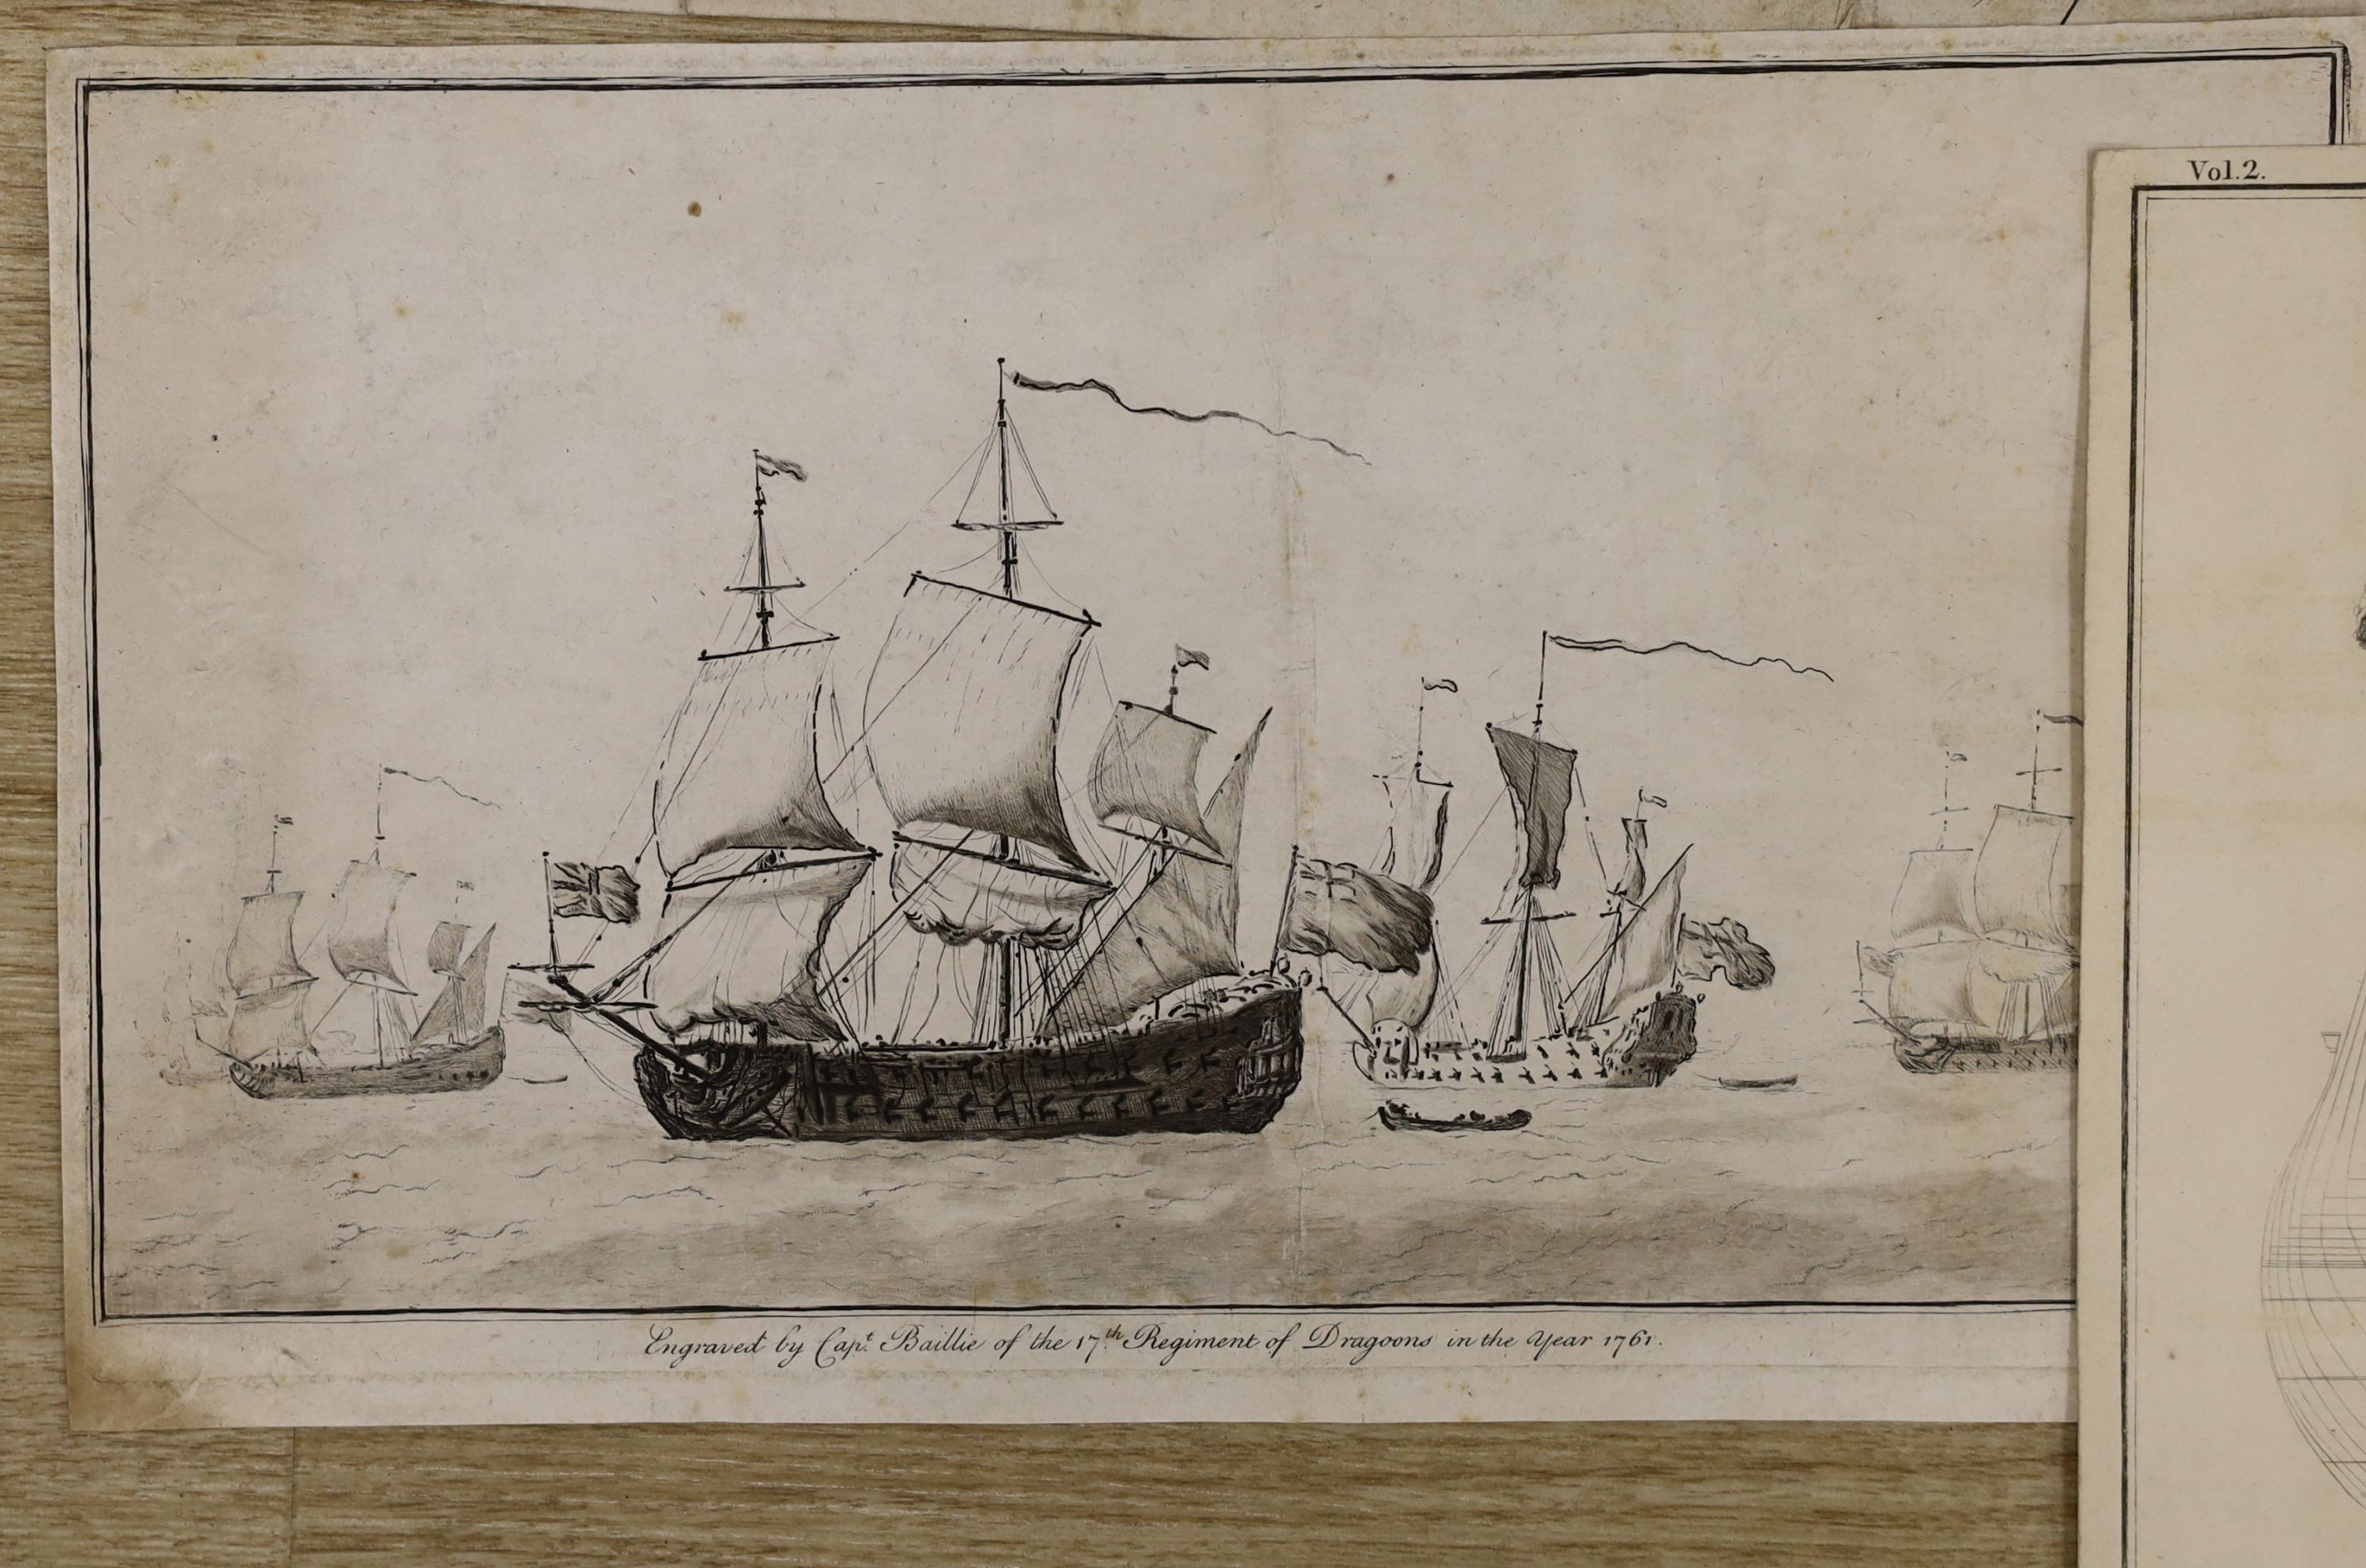 Baillie after Van de Velde, engraving, warships at sea, 1761, 18 x 31cm. an engraving of a warship inscribed 'Rule Britannia', 38 x 44cm, a John Charnock engraving, 'The Captain A British Third Rate. 1678', 28 x 60cm. an